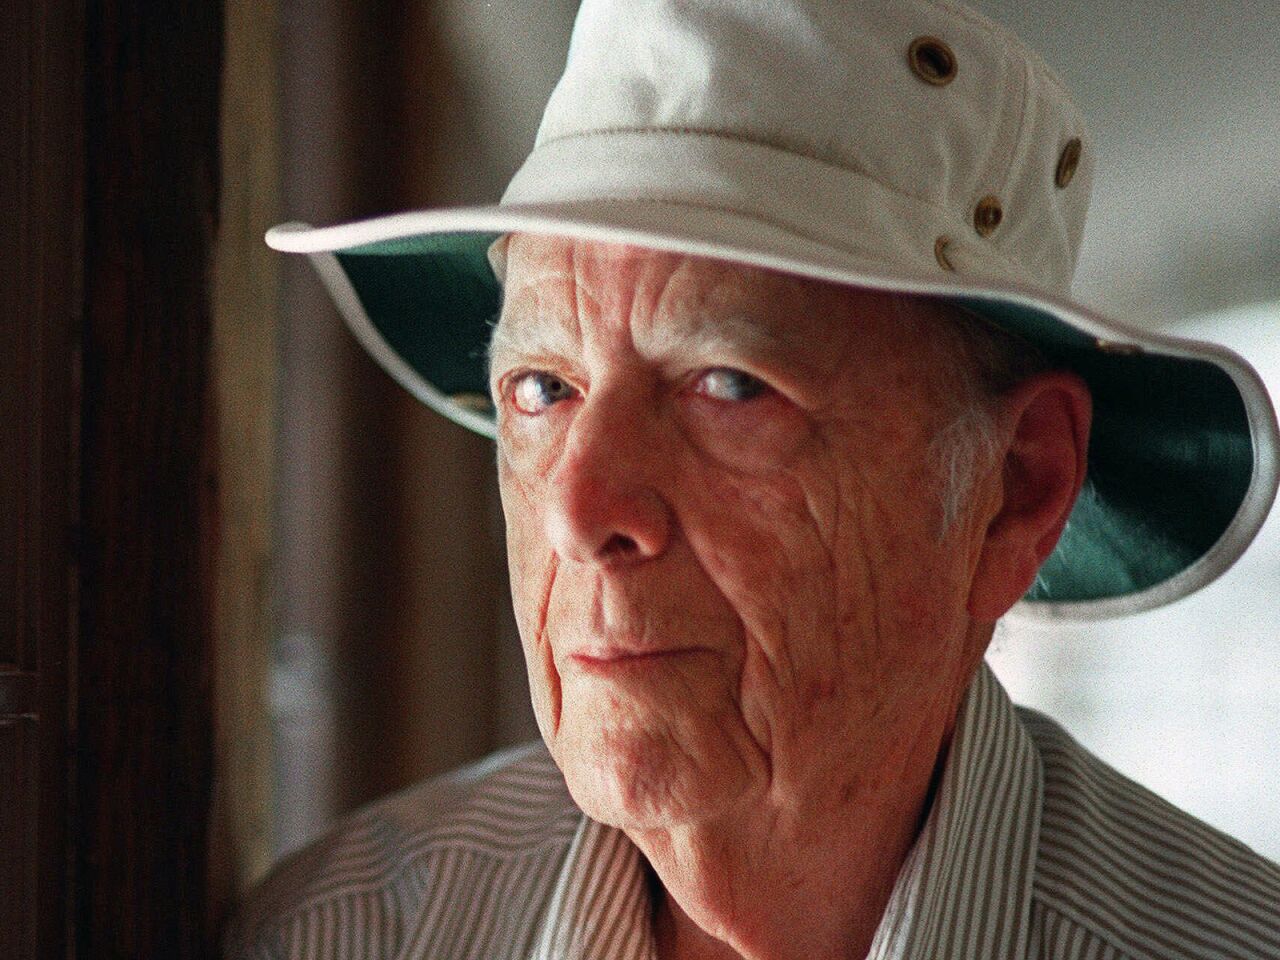 Herman Wouk explored the moral fallout of World War II in the Pulitzer Prize-winning “The Caine Mutiny” (1951) and other widely read books. Determined to produce a "great war book," Wouk wrote "The Winds of War" and its sequel, "War and Remembrance," in the 1970s, and the two sweeping novels became the basis for a pair of television miniseries. He was 103.